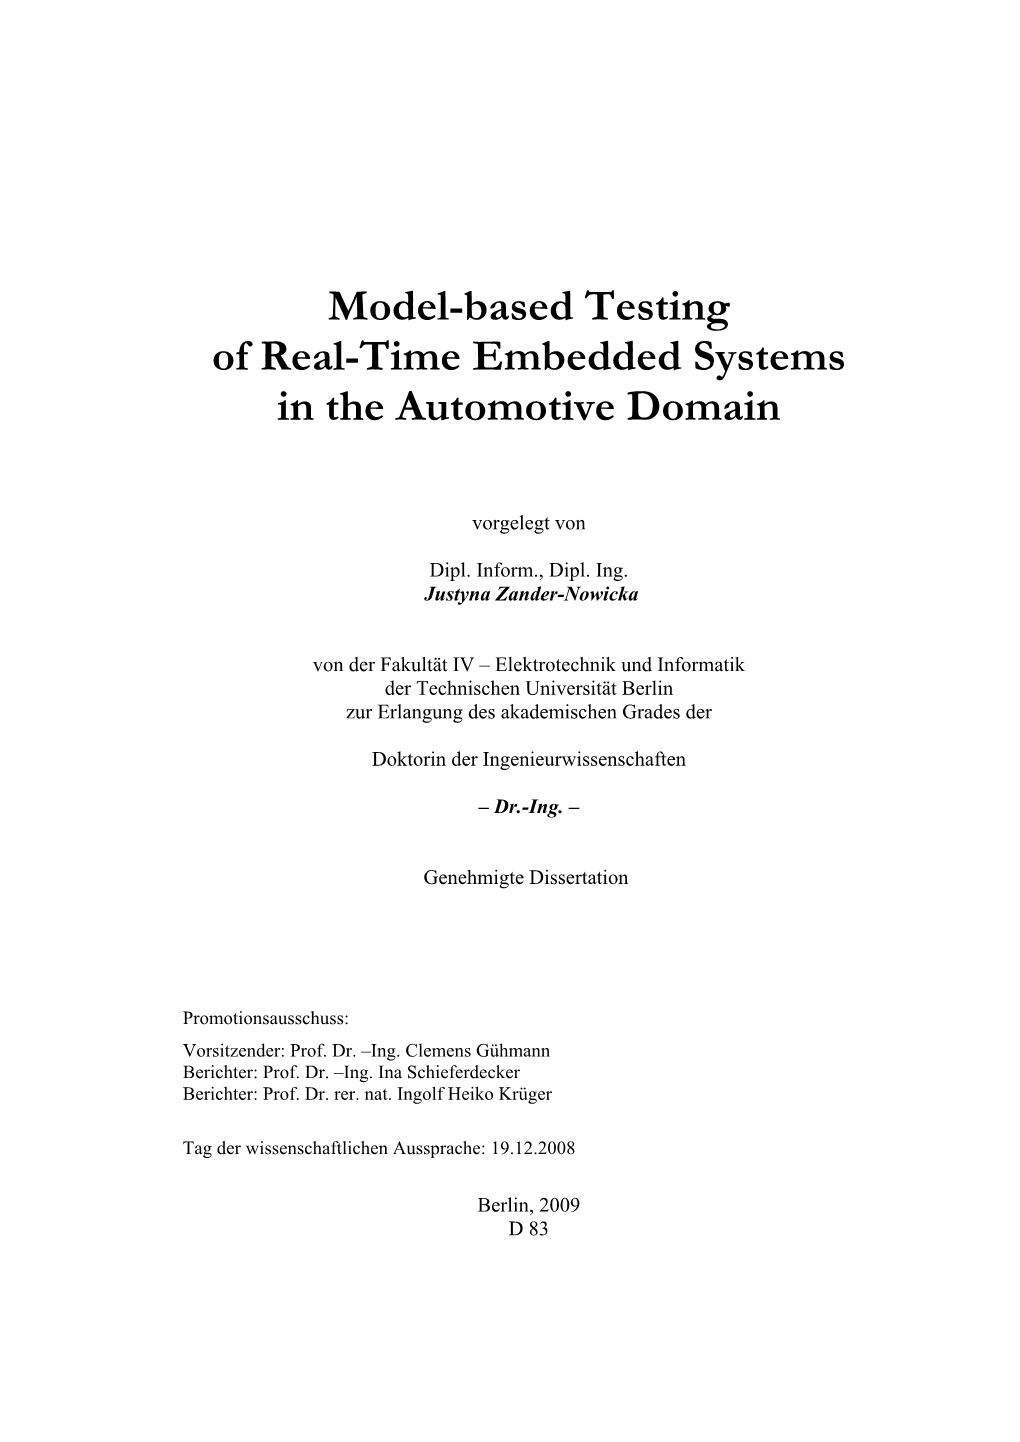 Model-Based Testing of Real-Time Embedded Systems in the Automotive Domain